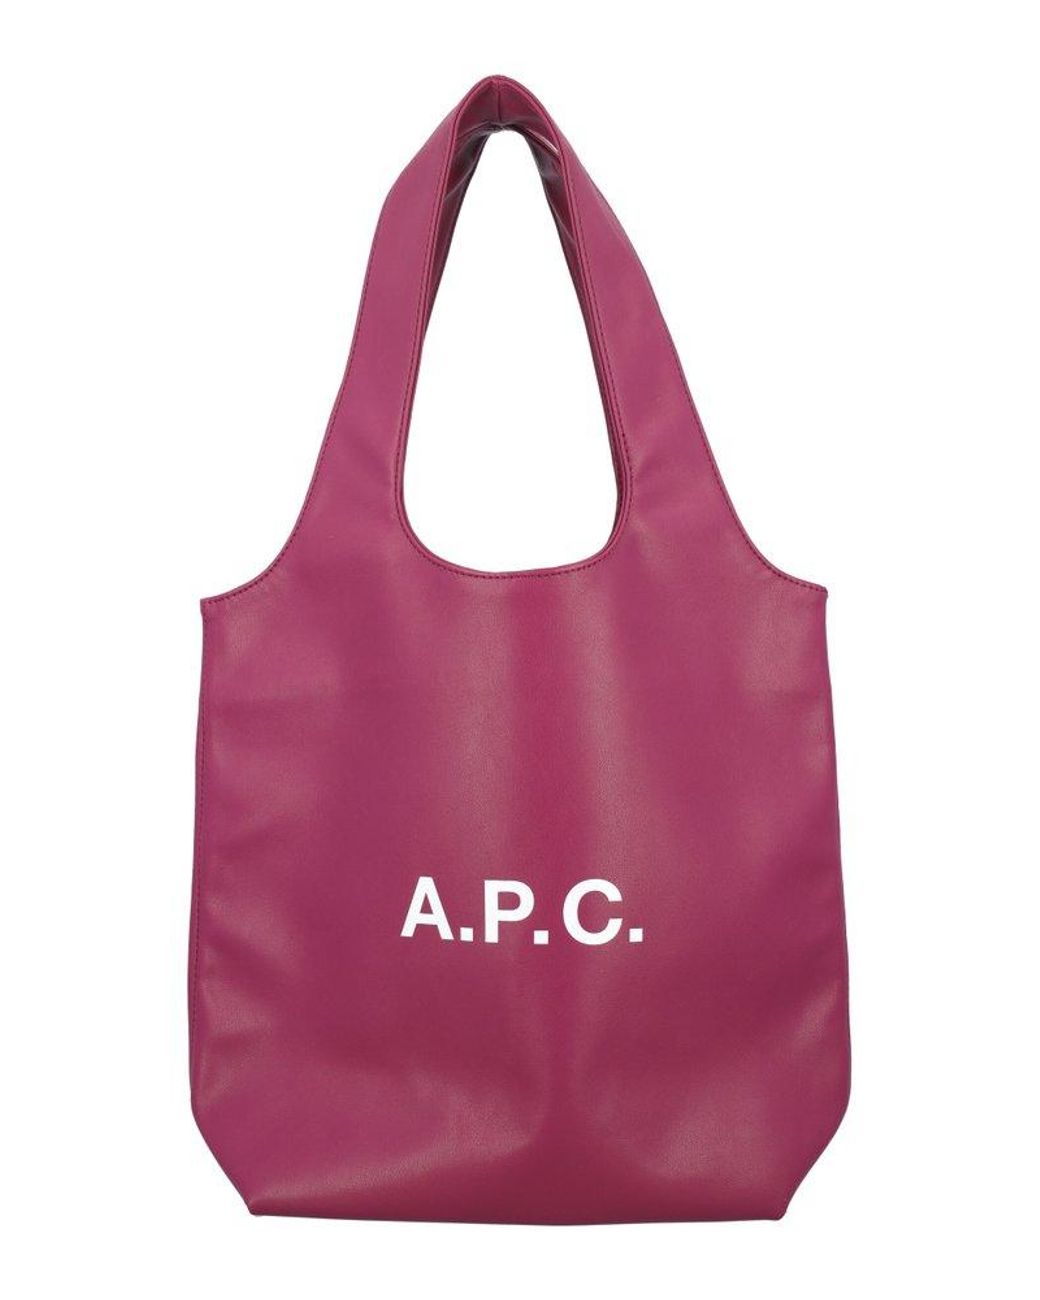 A.P.C. Ninon Small Tote Bag in Pink | Lyst